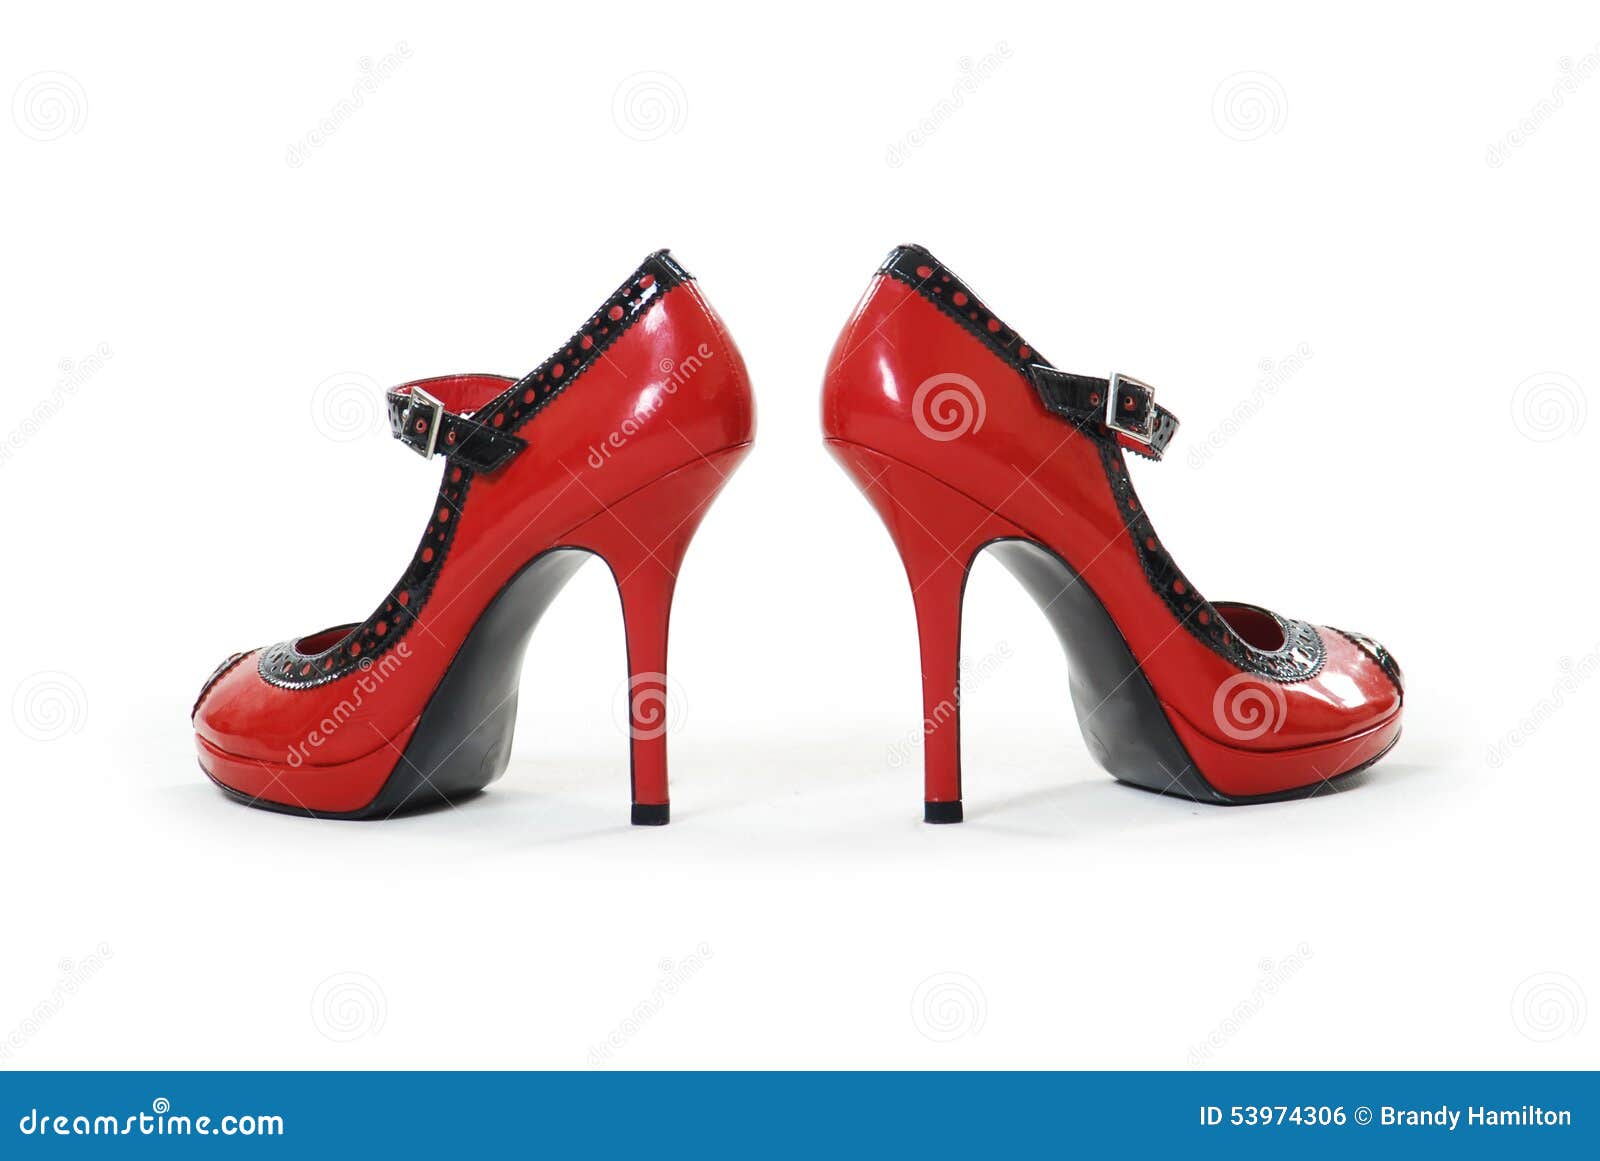 Pair Of Black And Red Stiletto High Heel Shoes Stock Photo - Image ...